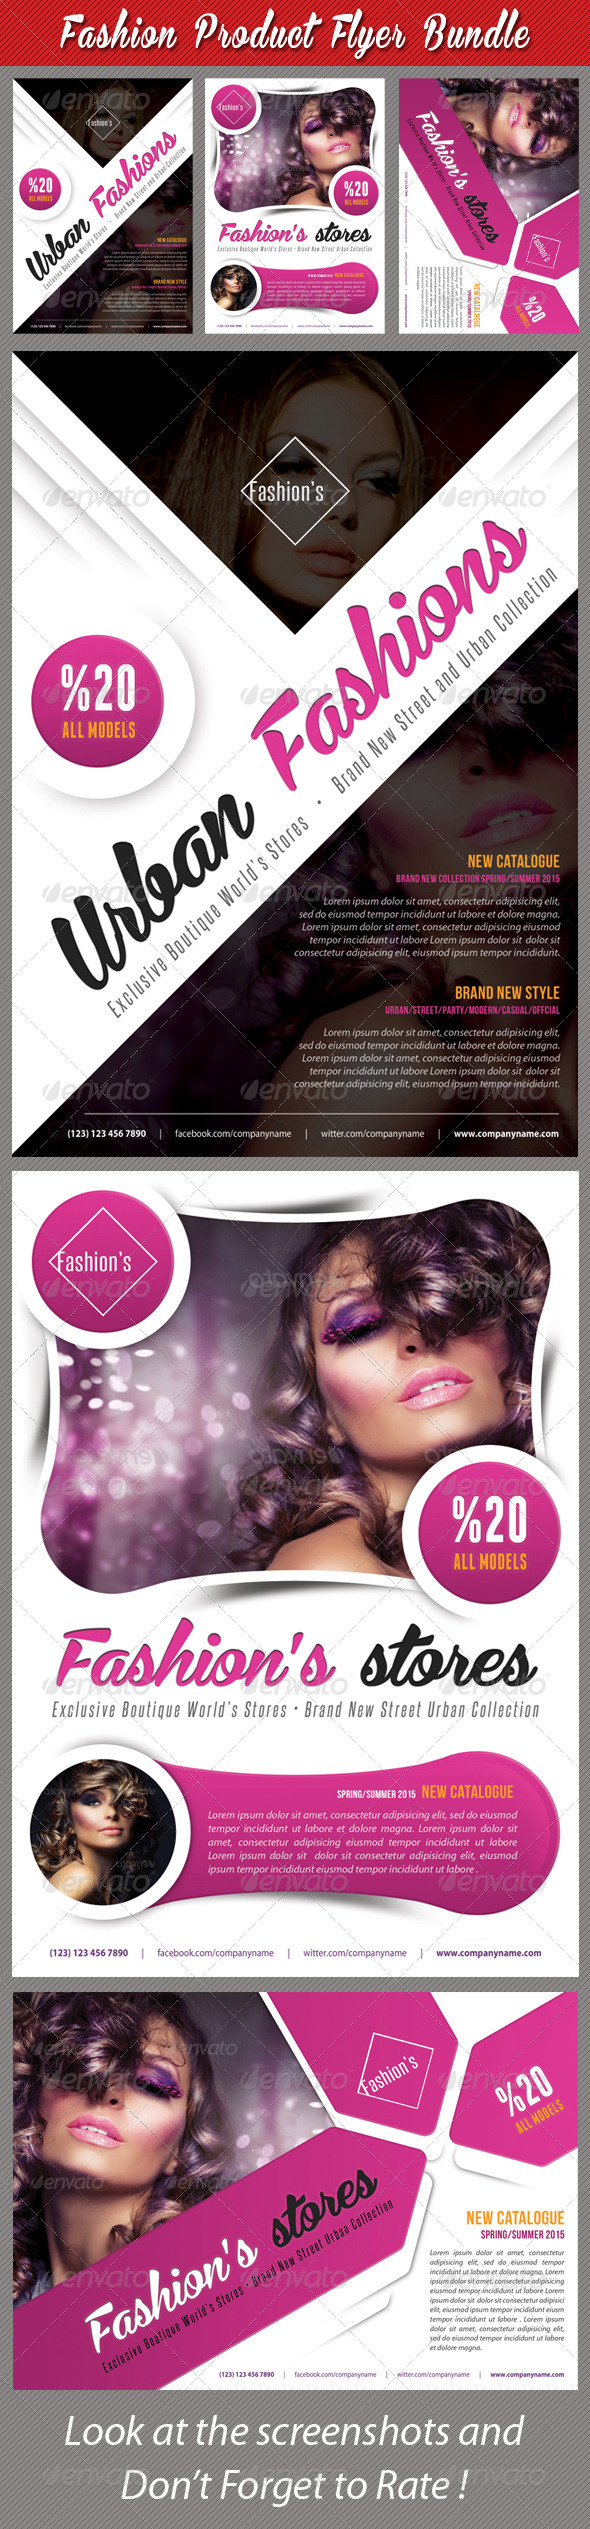 GraphicRiver 3 in 1 Fashion Product Flyer Bundle 19 7638826